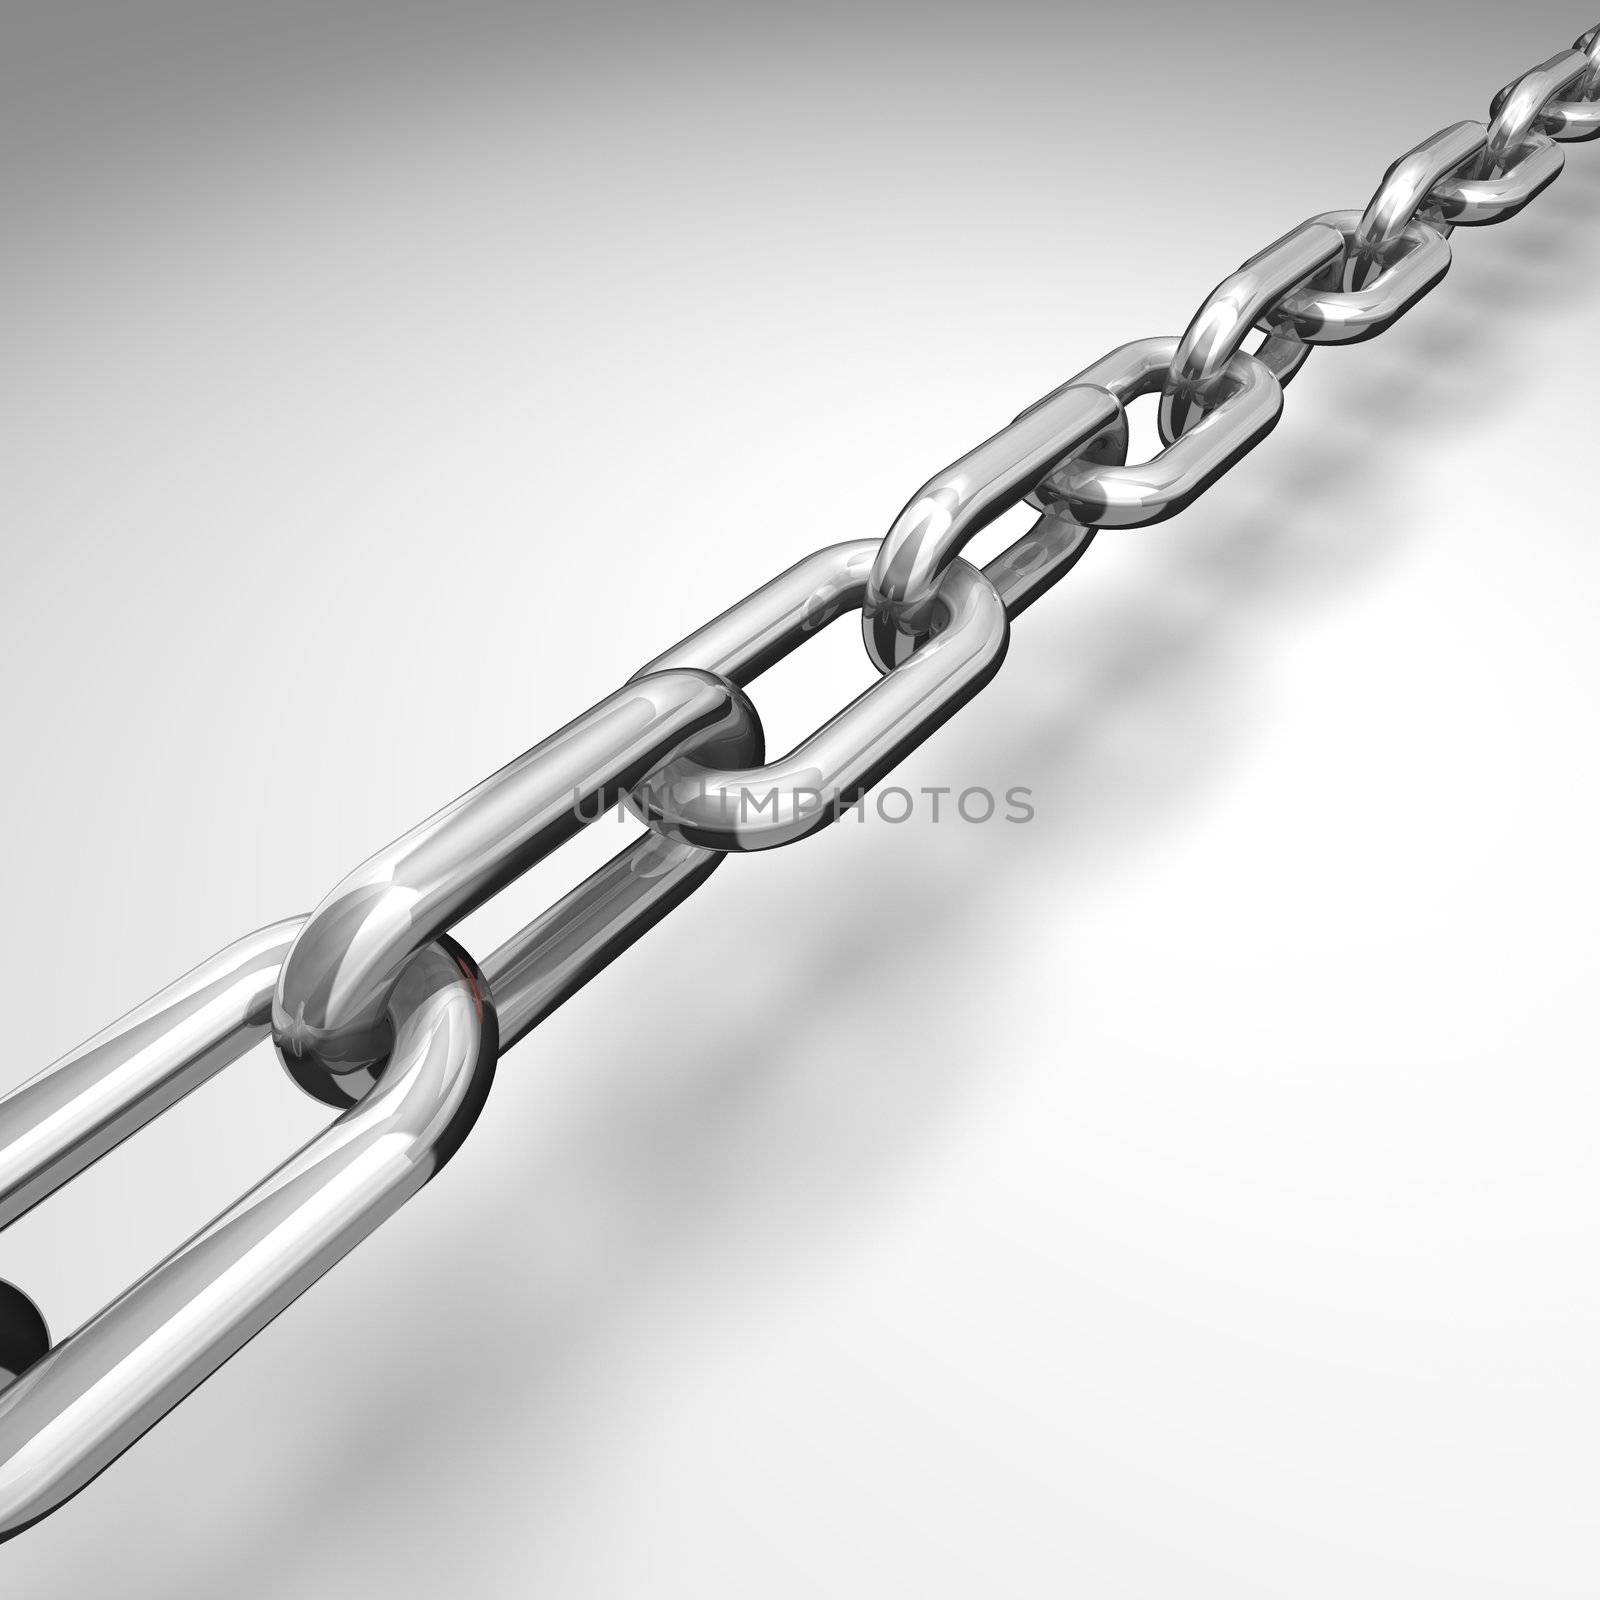 3d illustration of a silver chain - conceptual image